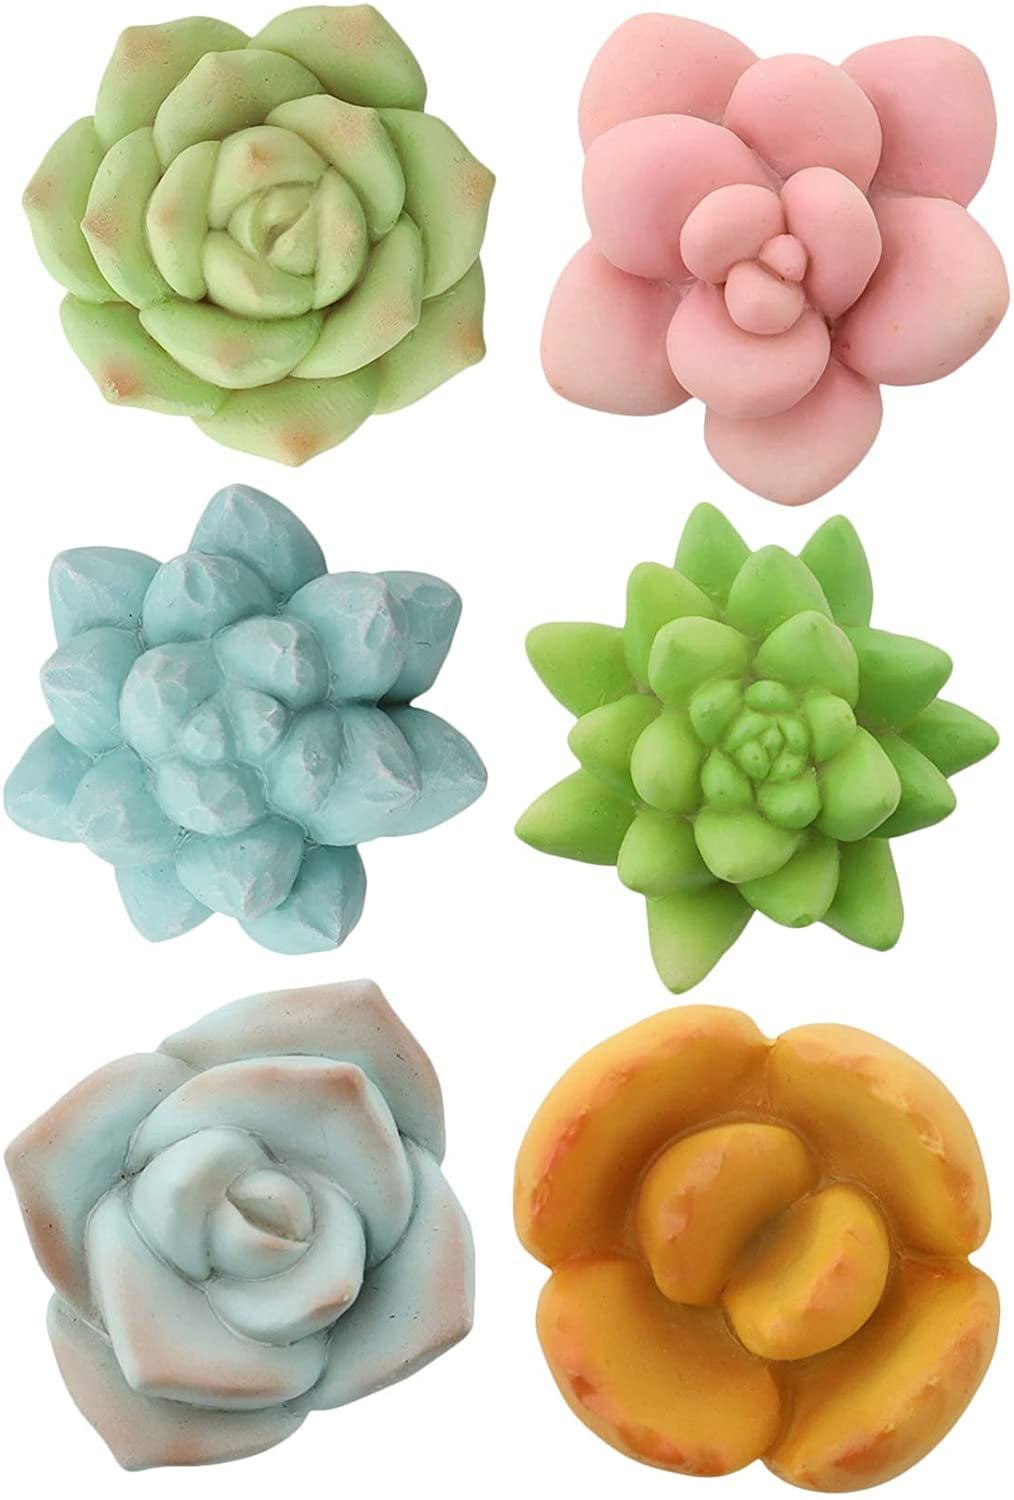 Set of 2 Refrigerator or Whiteboard Magnets Spring Inspired or 6 Rose Magnets made of Resin Customizable Color Flower Magnets 4